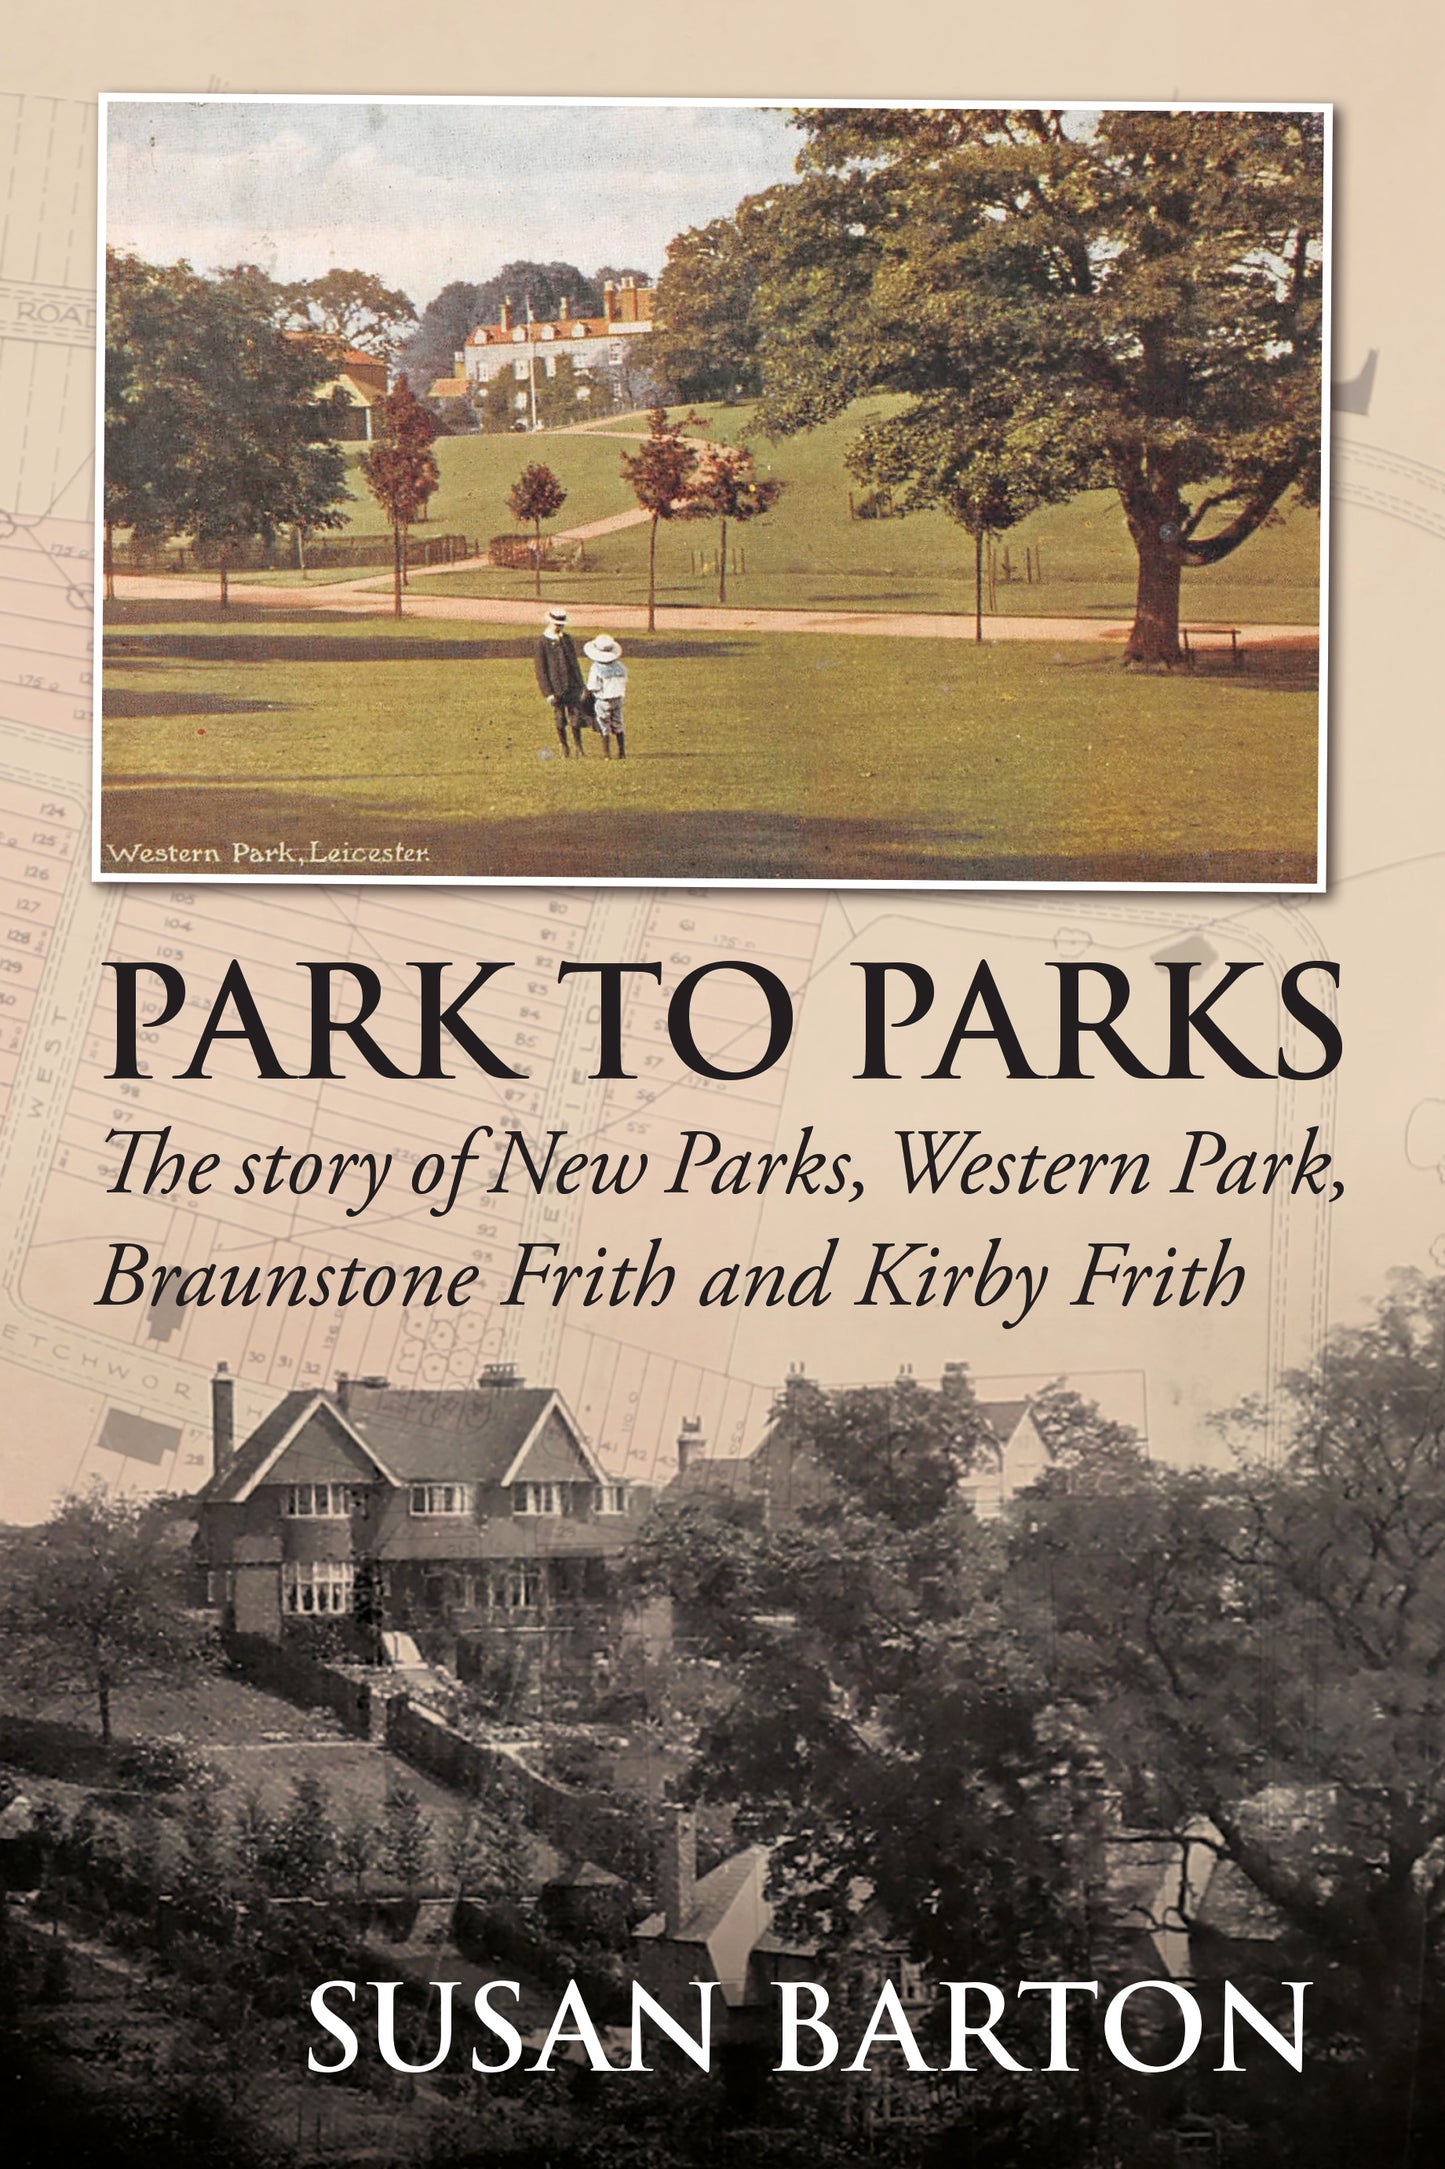 Park to Parks - The Story of New Parks, Western Park, Braunstone Frith and Kirby Frith